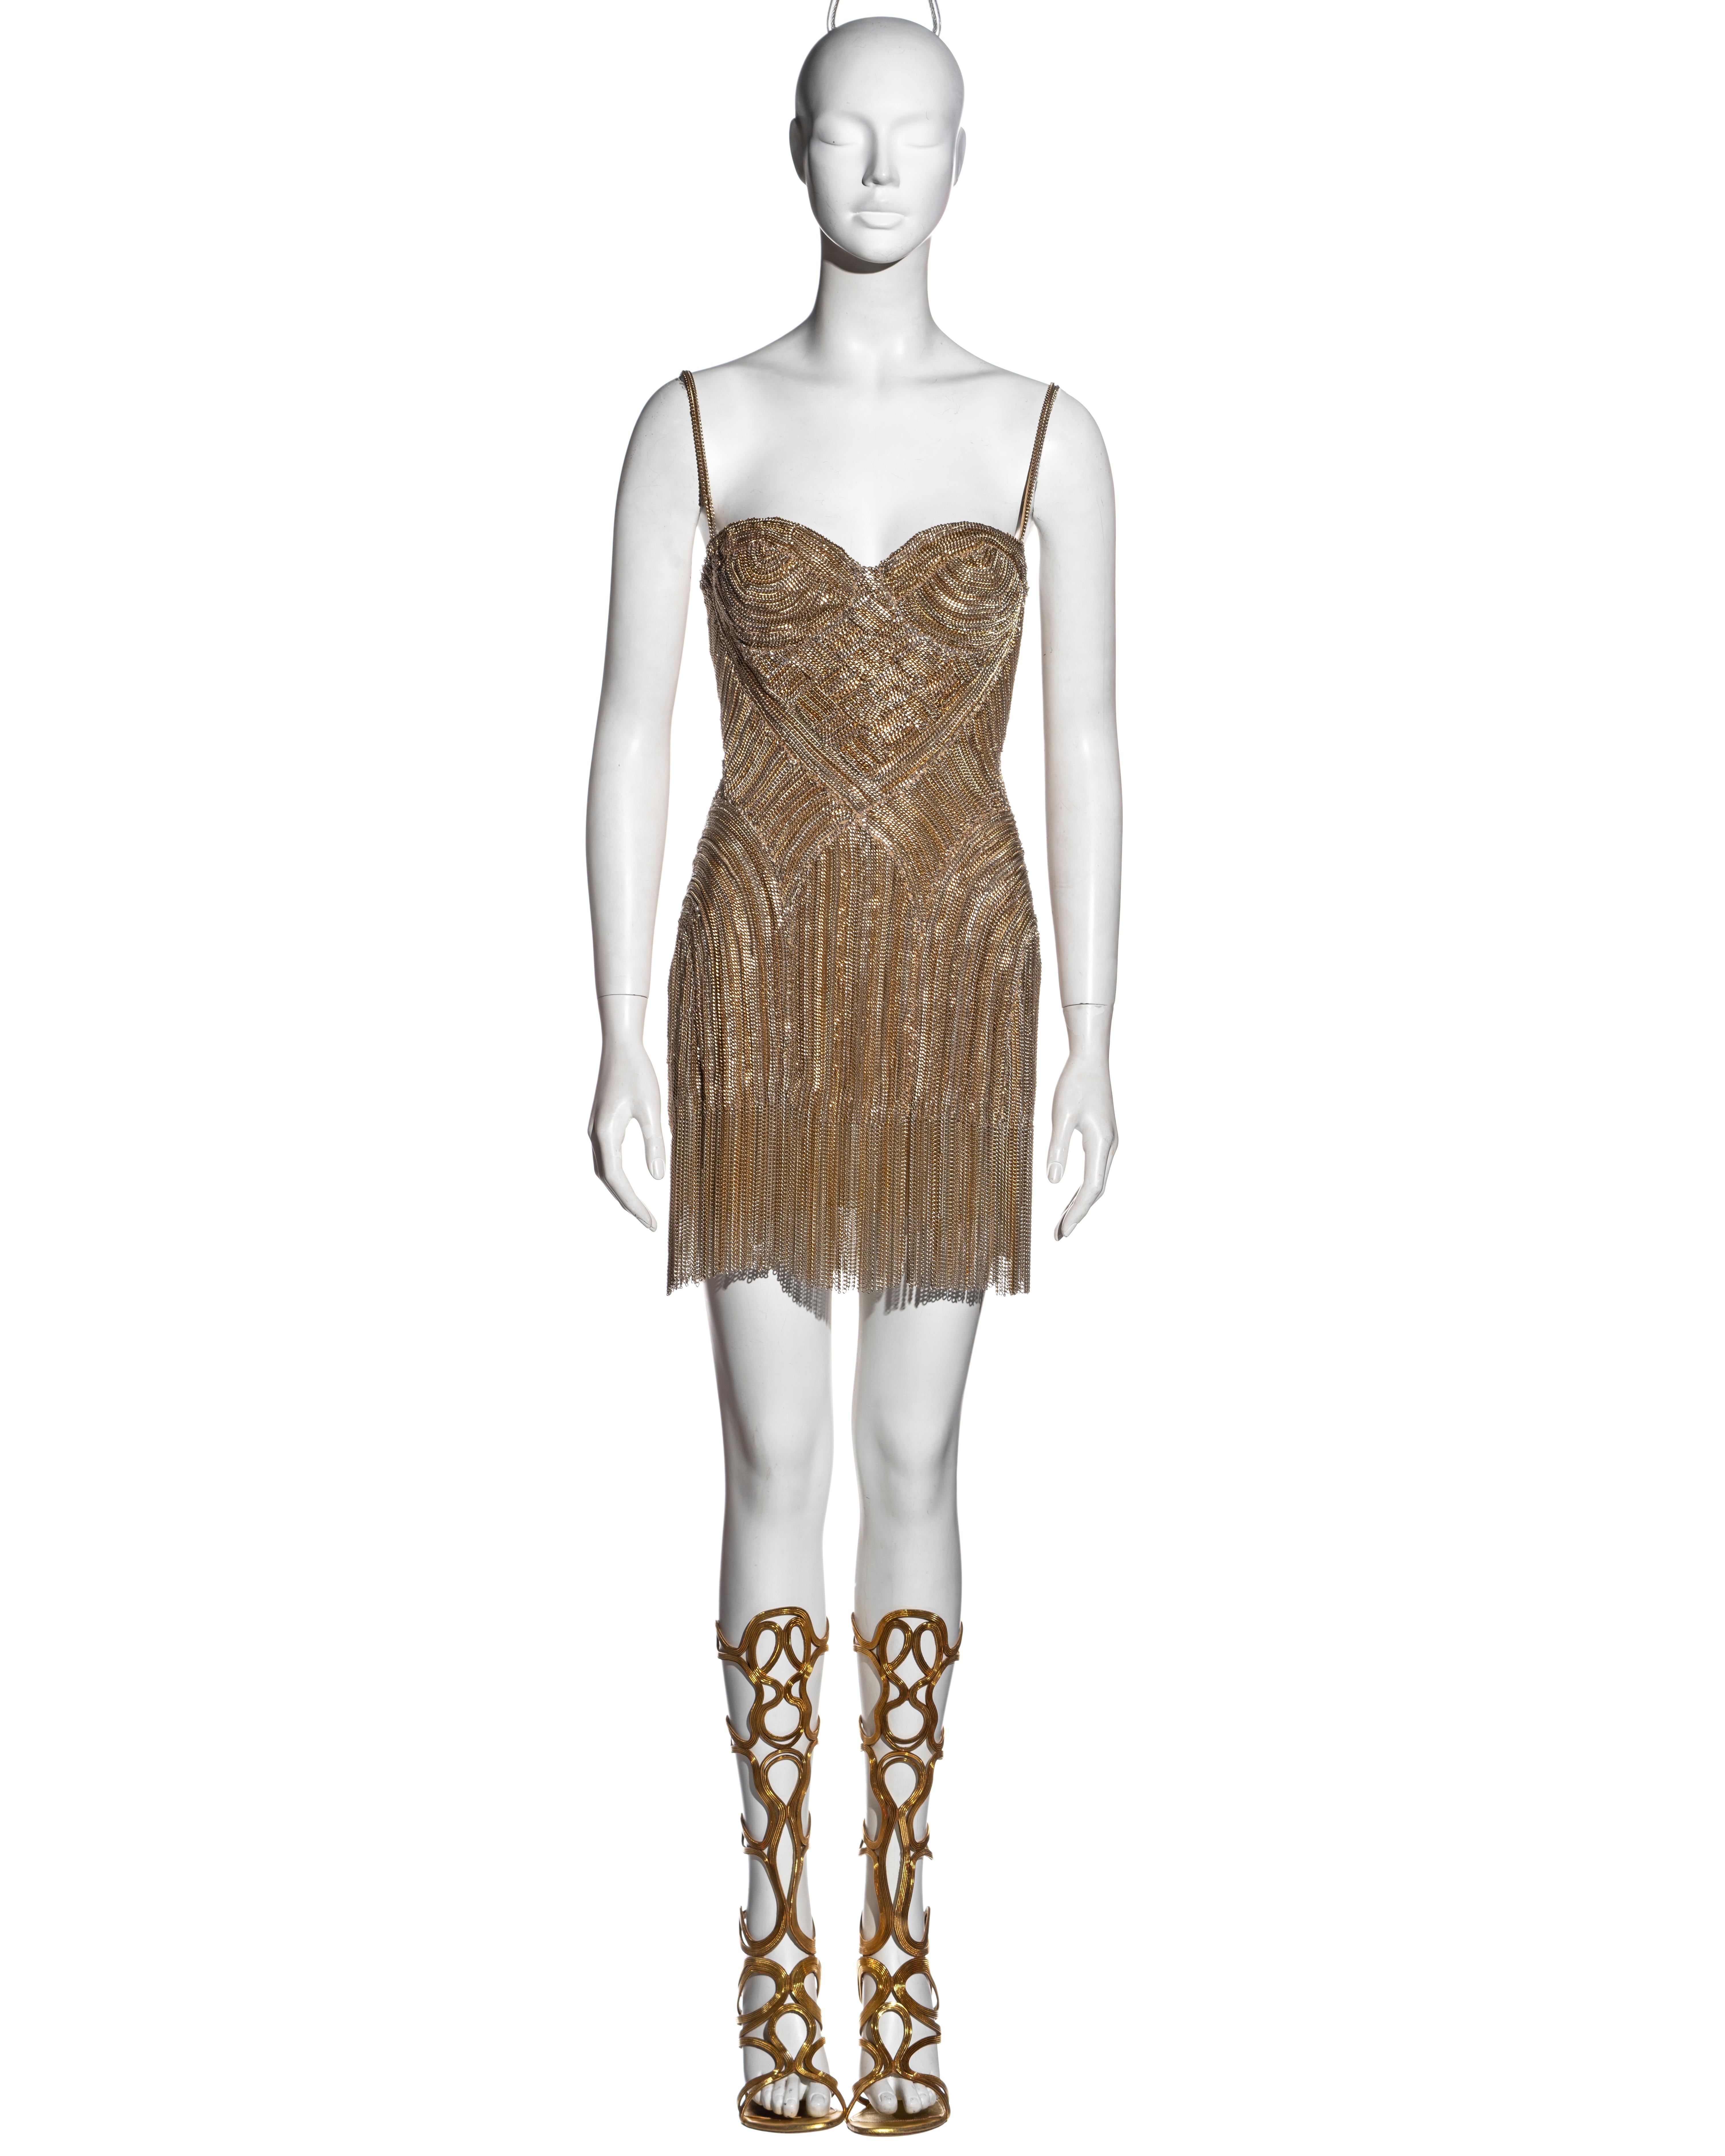 ▪ Rare Alexander McQueen gold metal chain evening mini dress
▪ Gold and silver metal chain embroidery 
▪ Heavy weight
▪ Chain tassel trim 
▪ Built-in corset and bra
▪ IT 40 - FR 36 - UK 8 - US 4
▪ Spring-Summer 2006
▪ Made in Italy
▪ Shoes sold